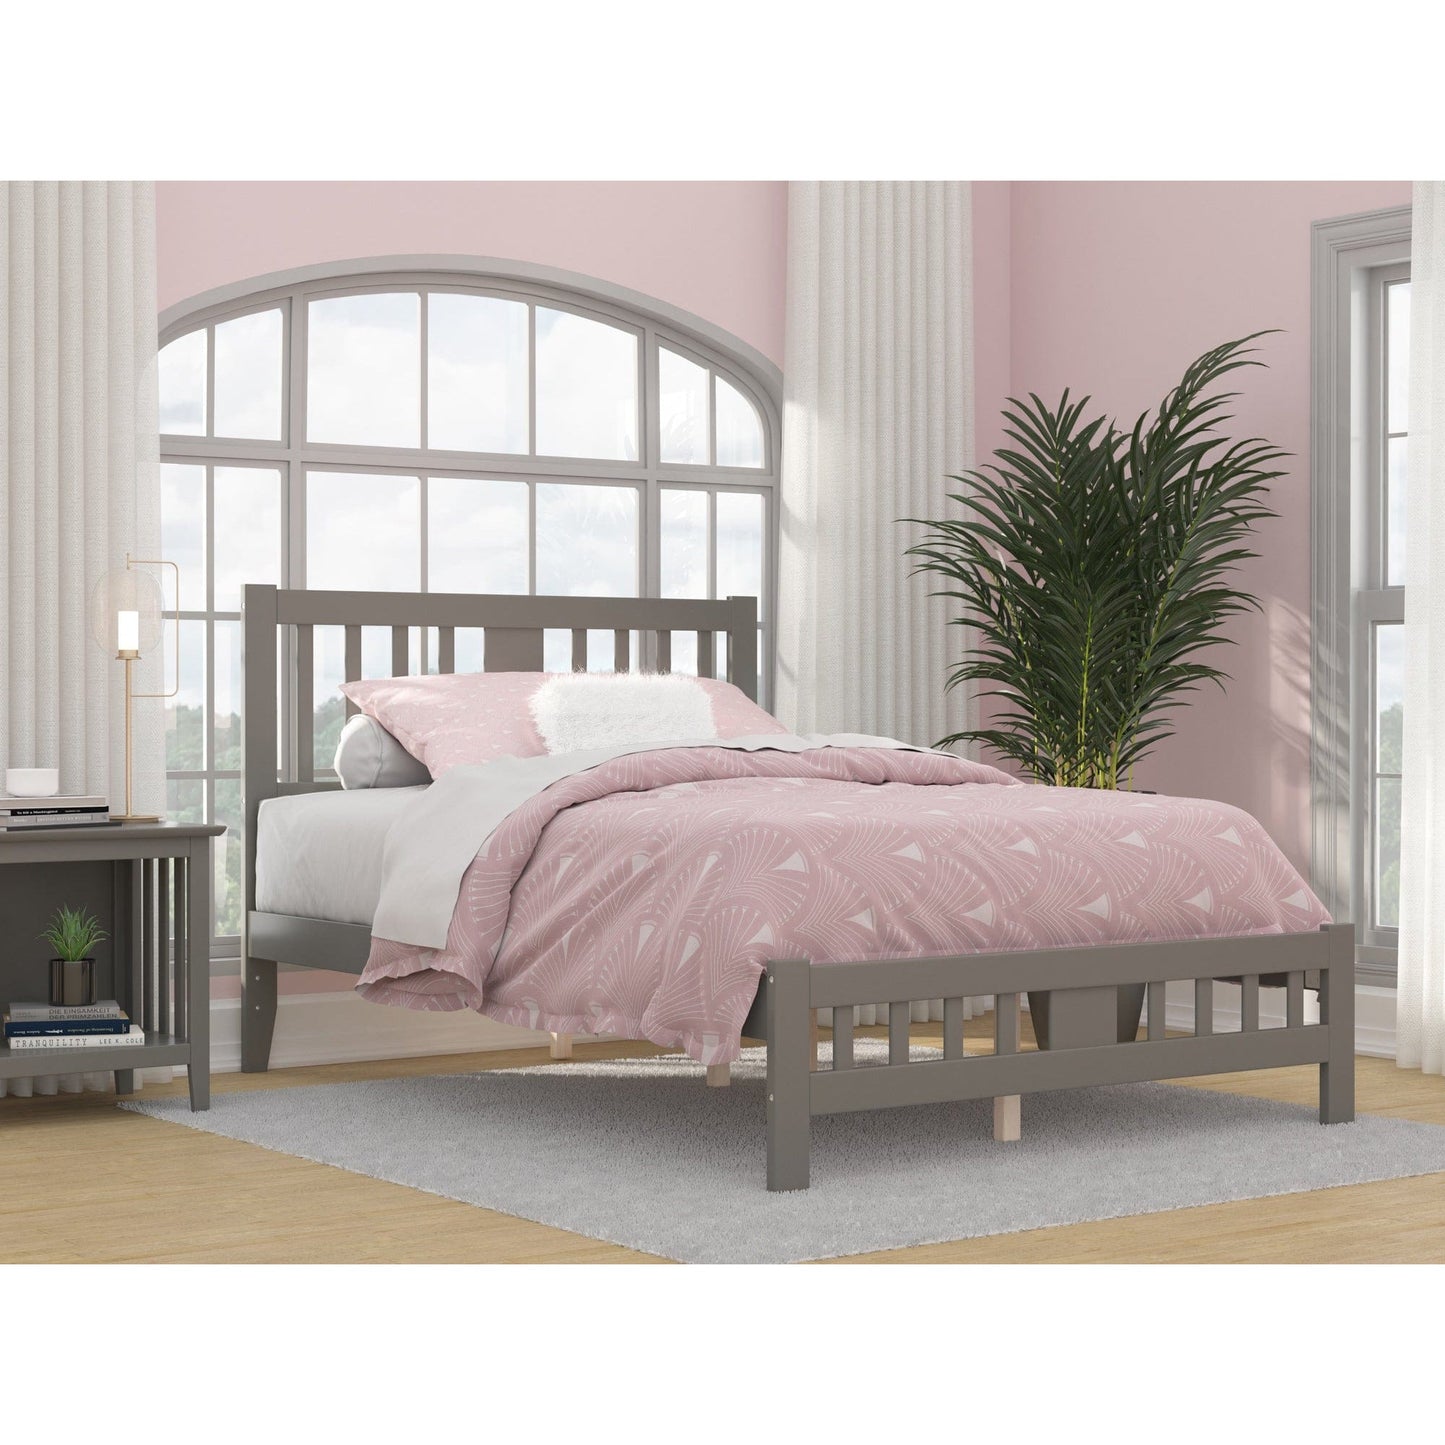 AFI Furnishings Tahoe Full Bed with Footboard in Grey AG8960039